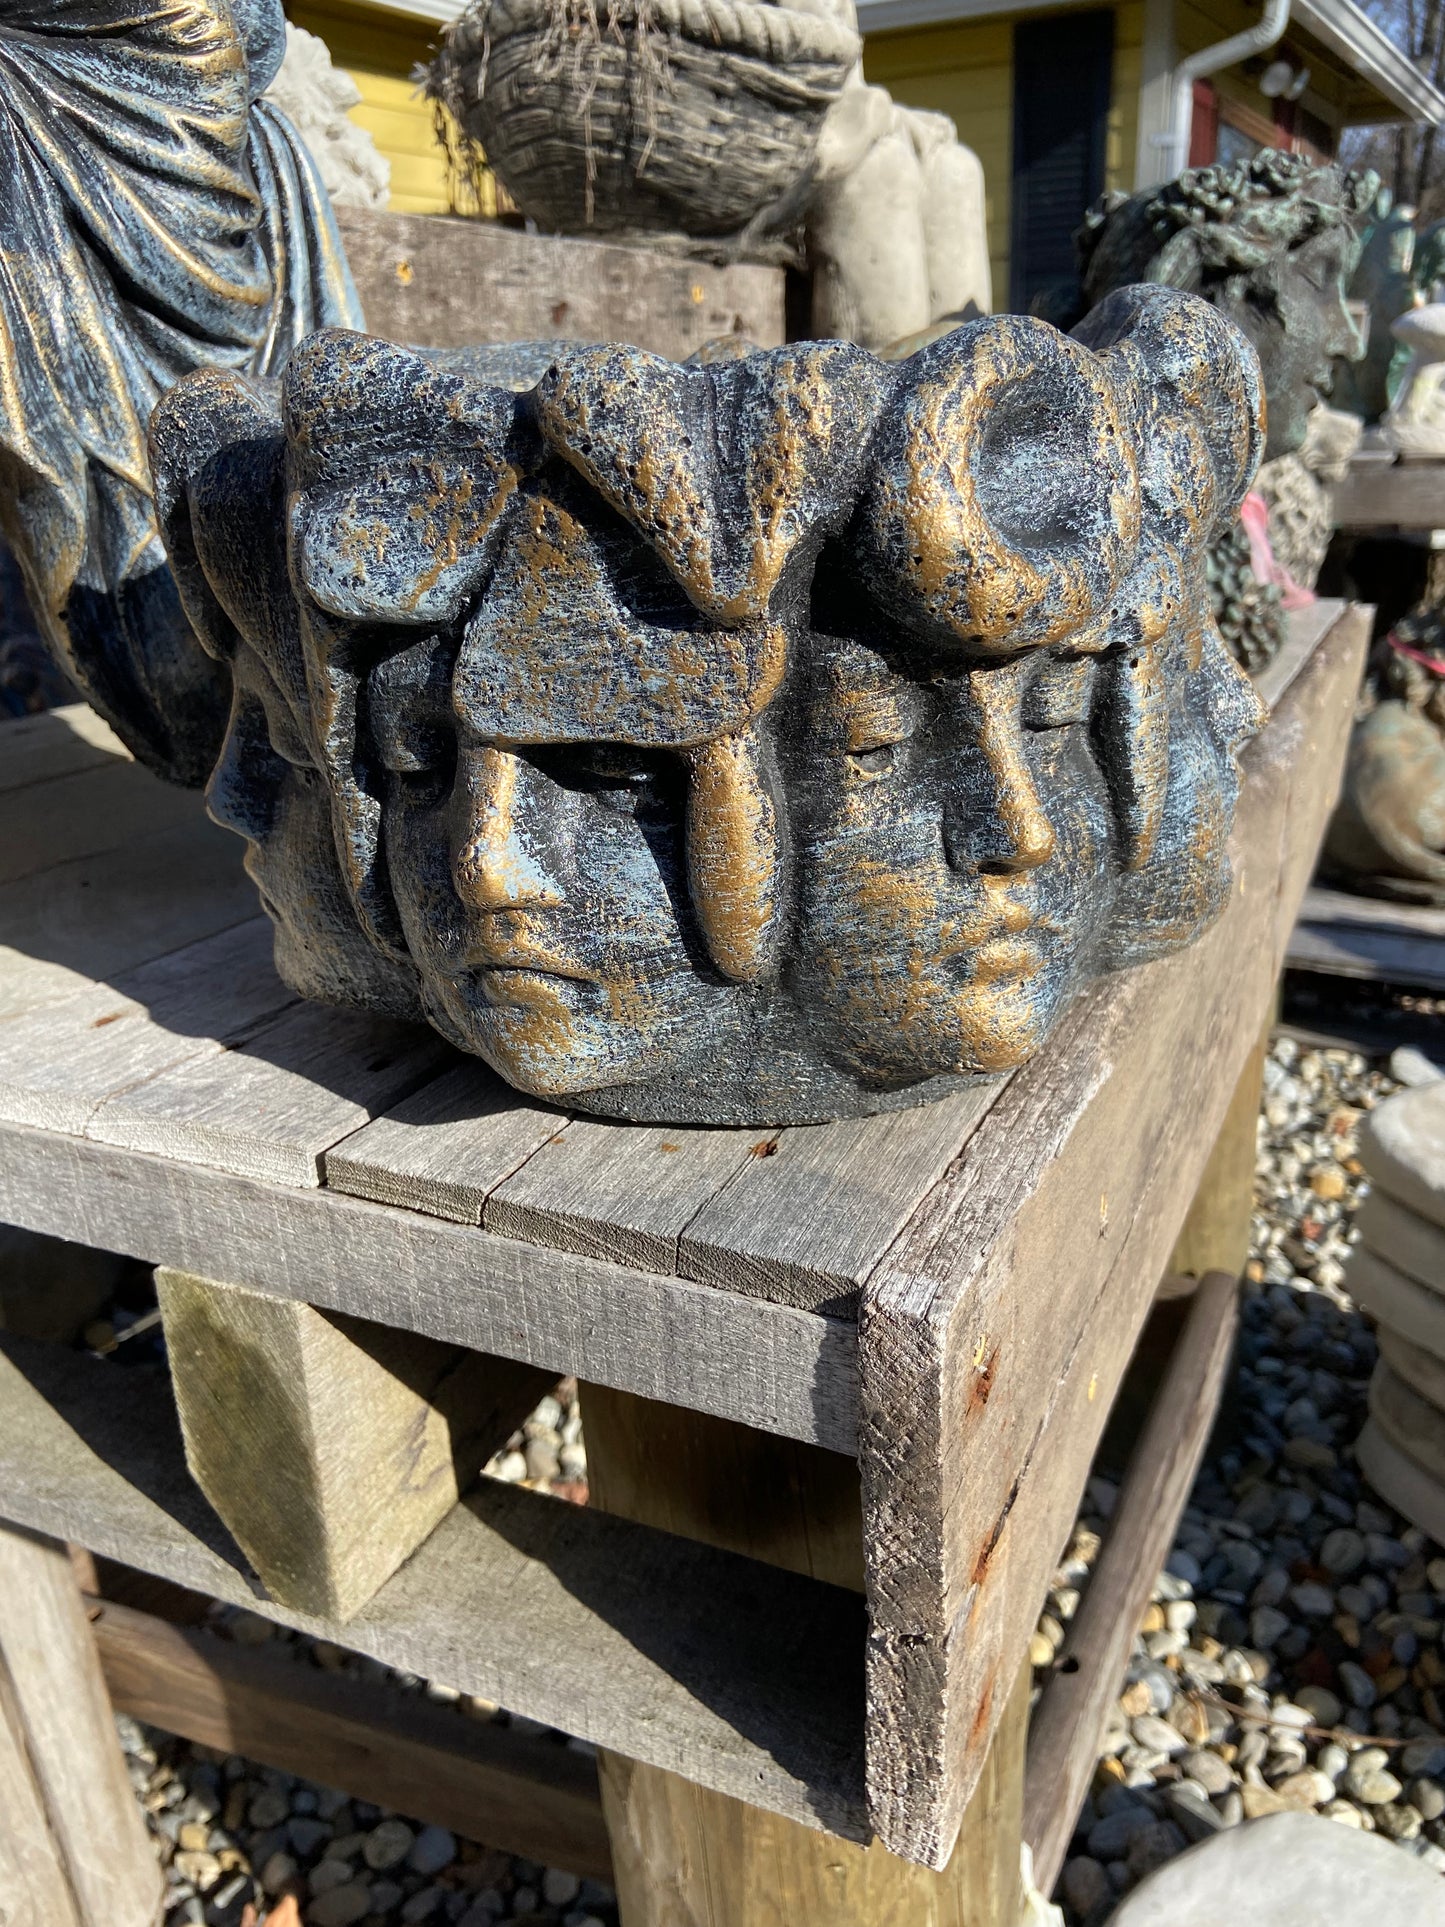 Pot with many Faces